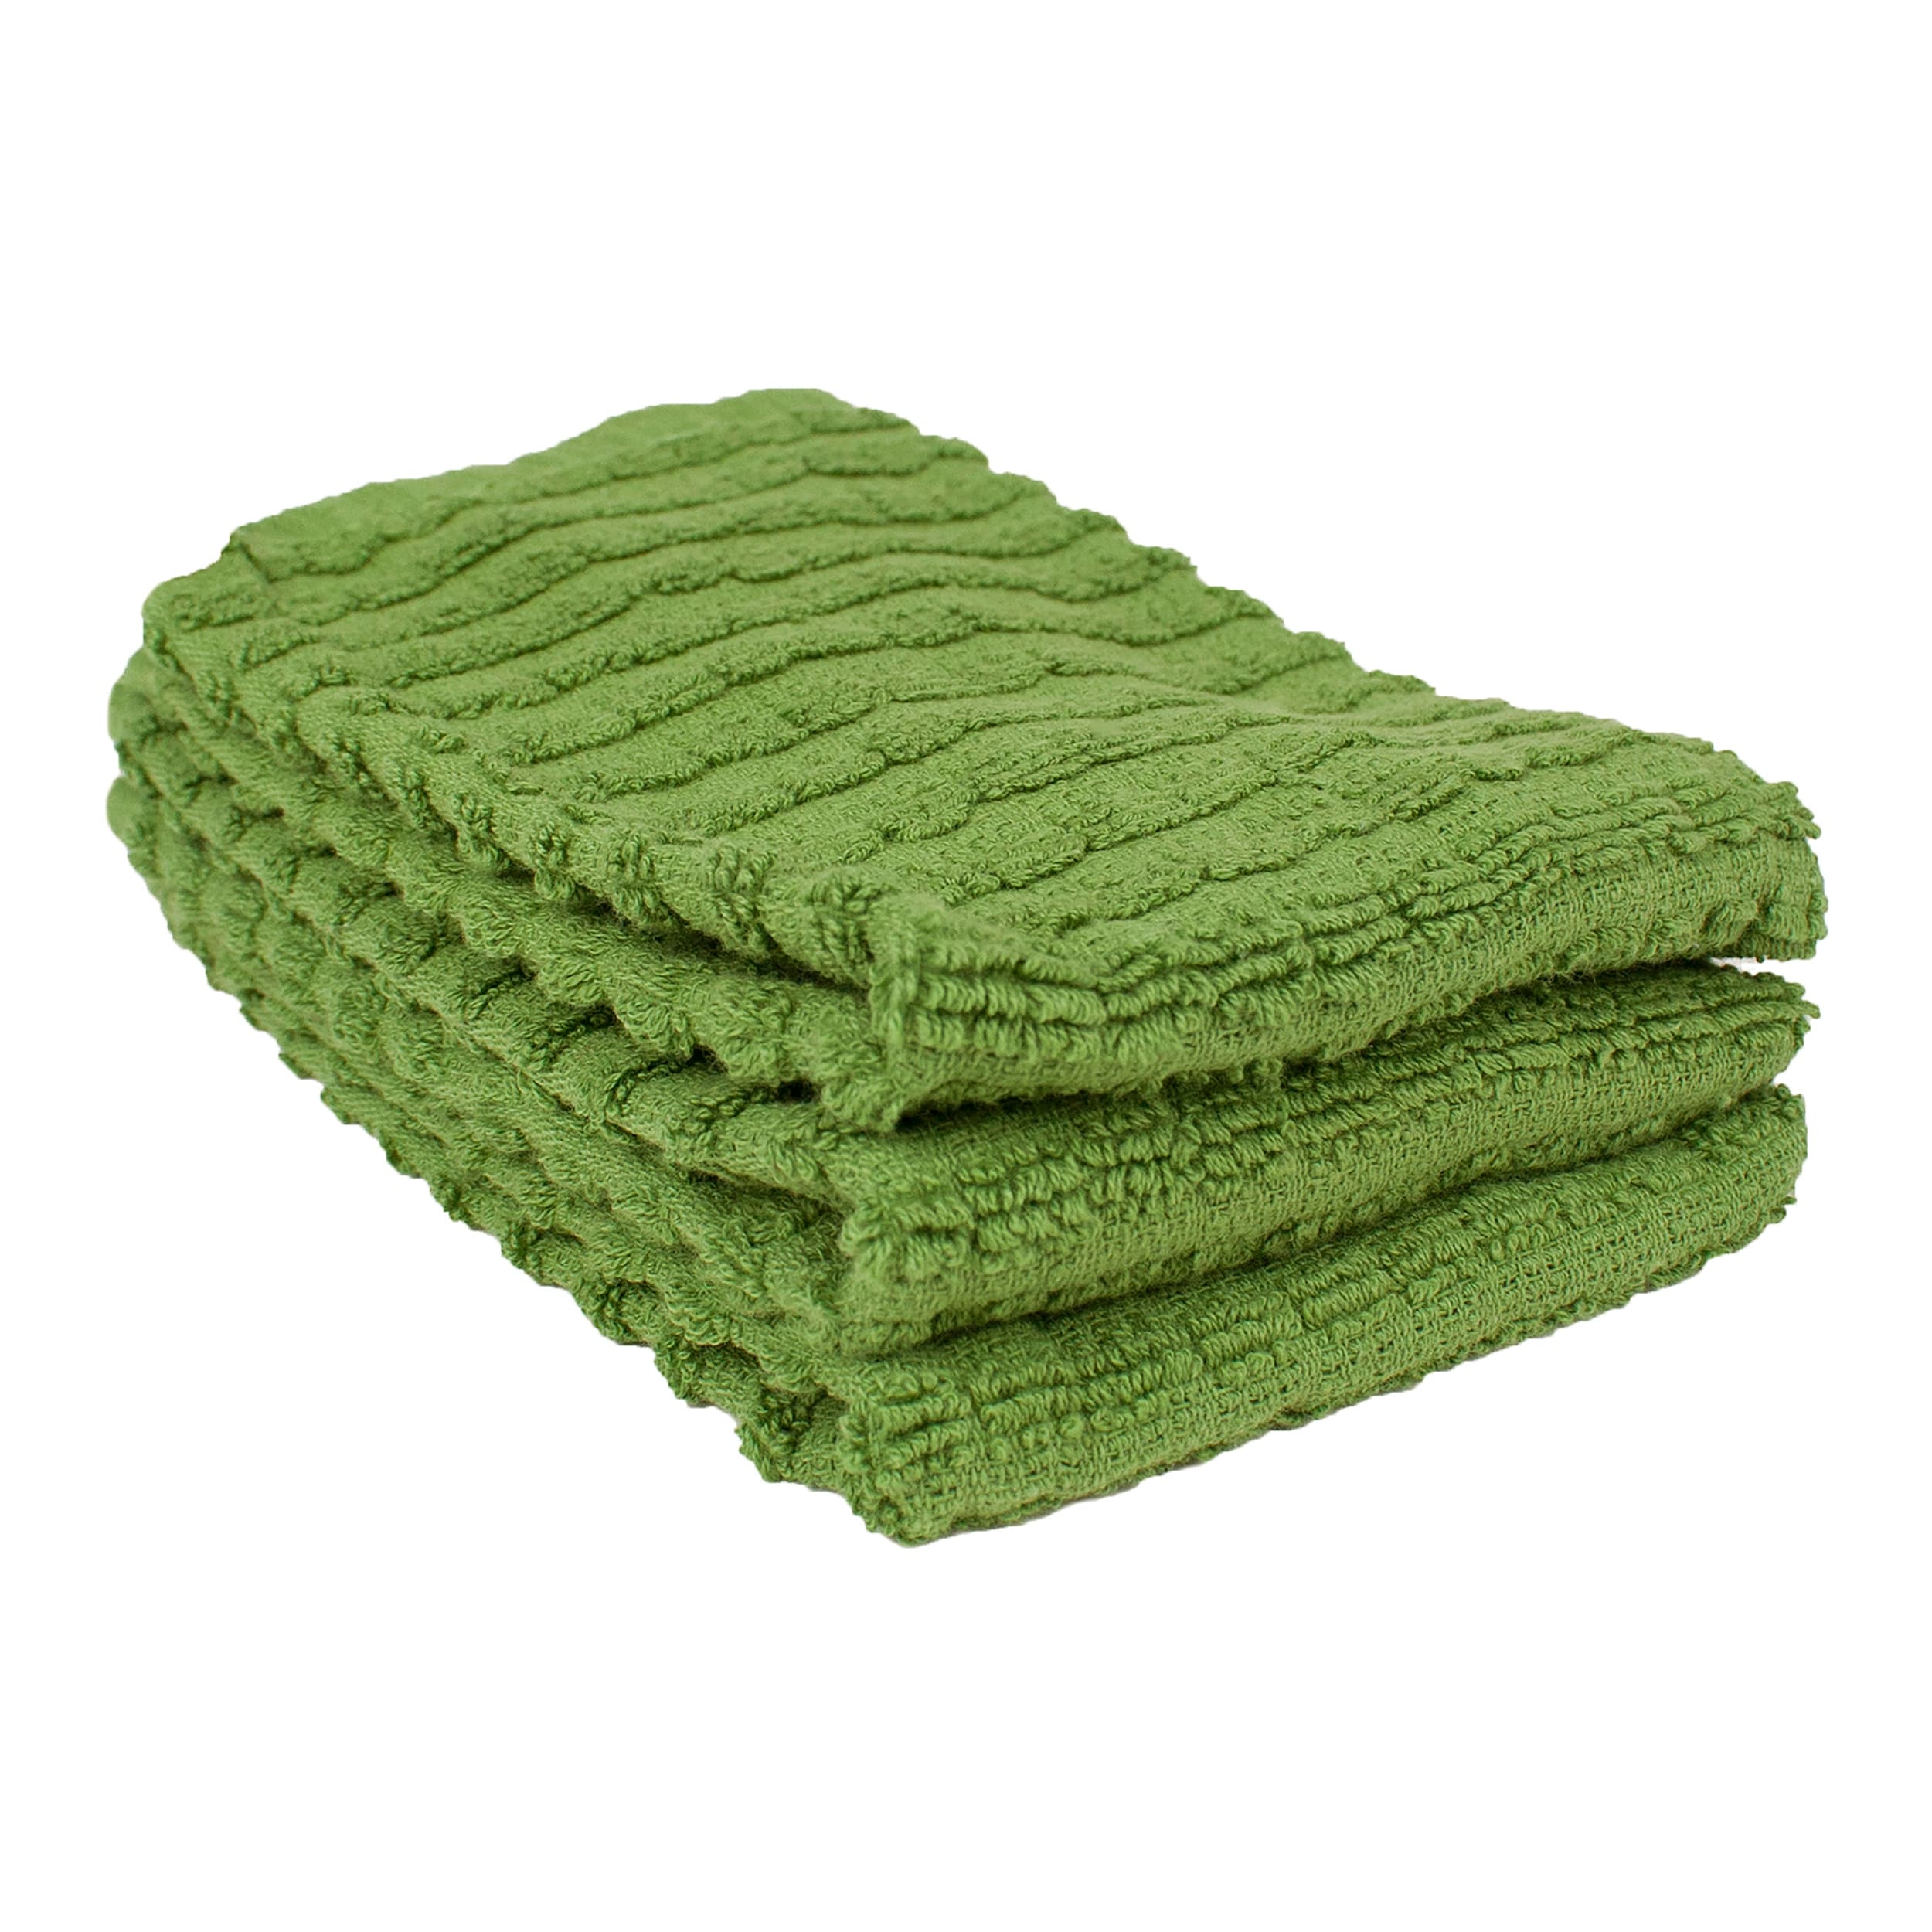 Christmas Wonder Towel Set Featuring A Set Of 3 100% Cotton Terry